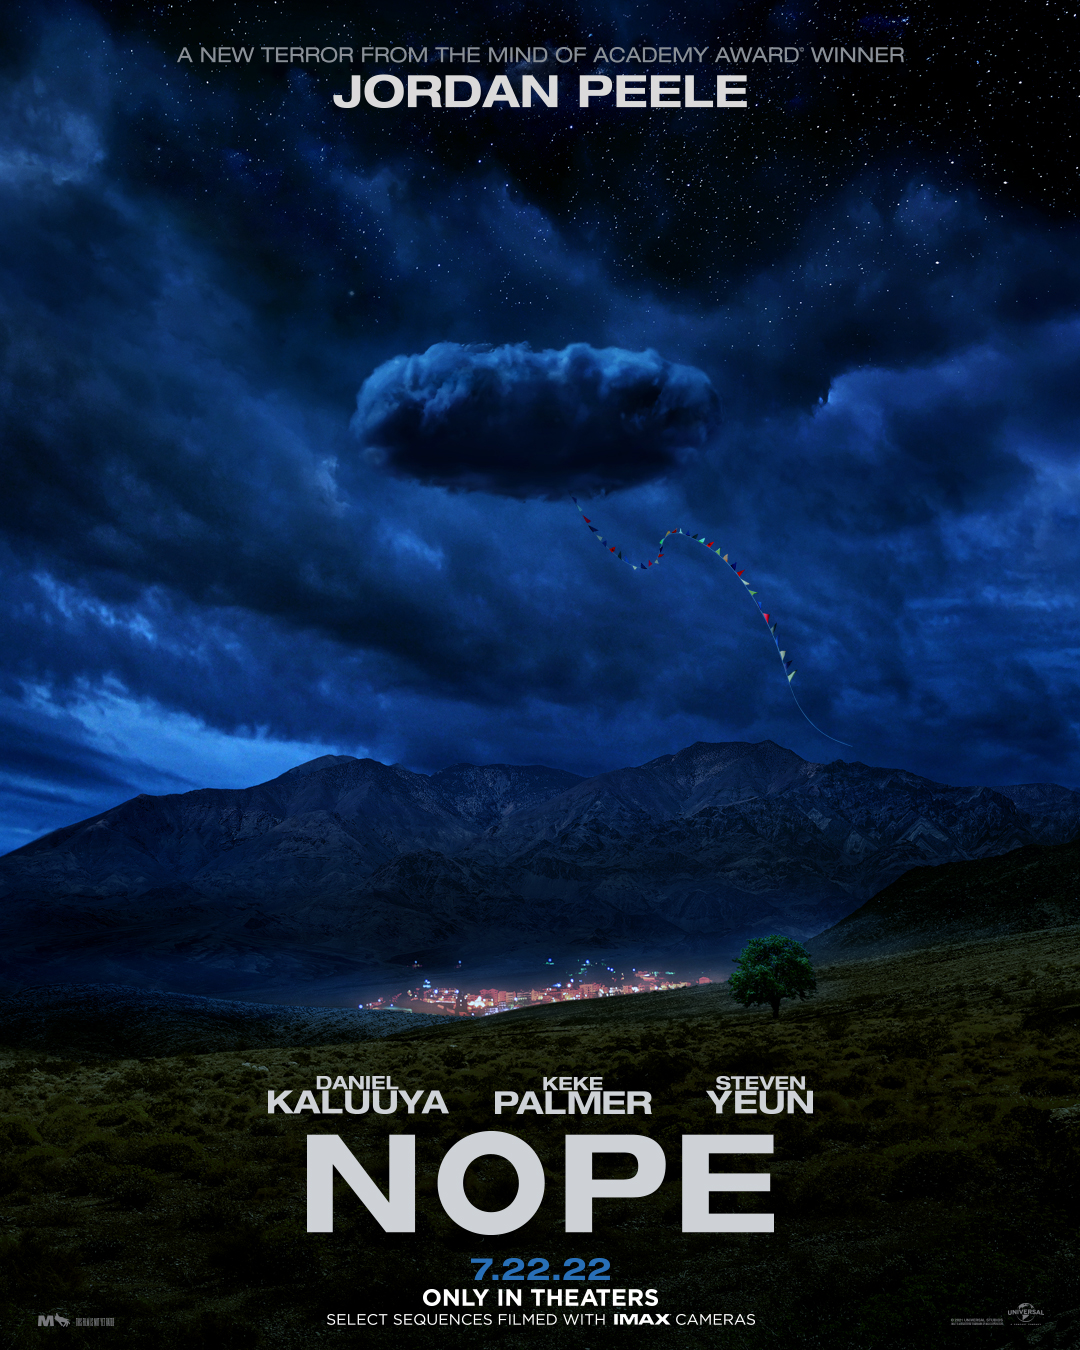 Jordan Peele's 'Nope' Poster Tells Us Nothing About The Movie, But We're Going To Speculate Wildly Anyway